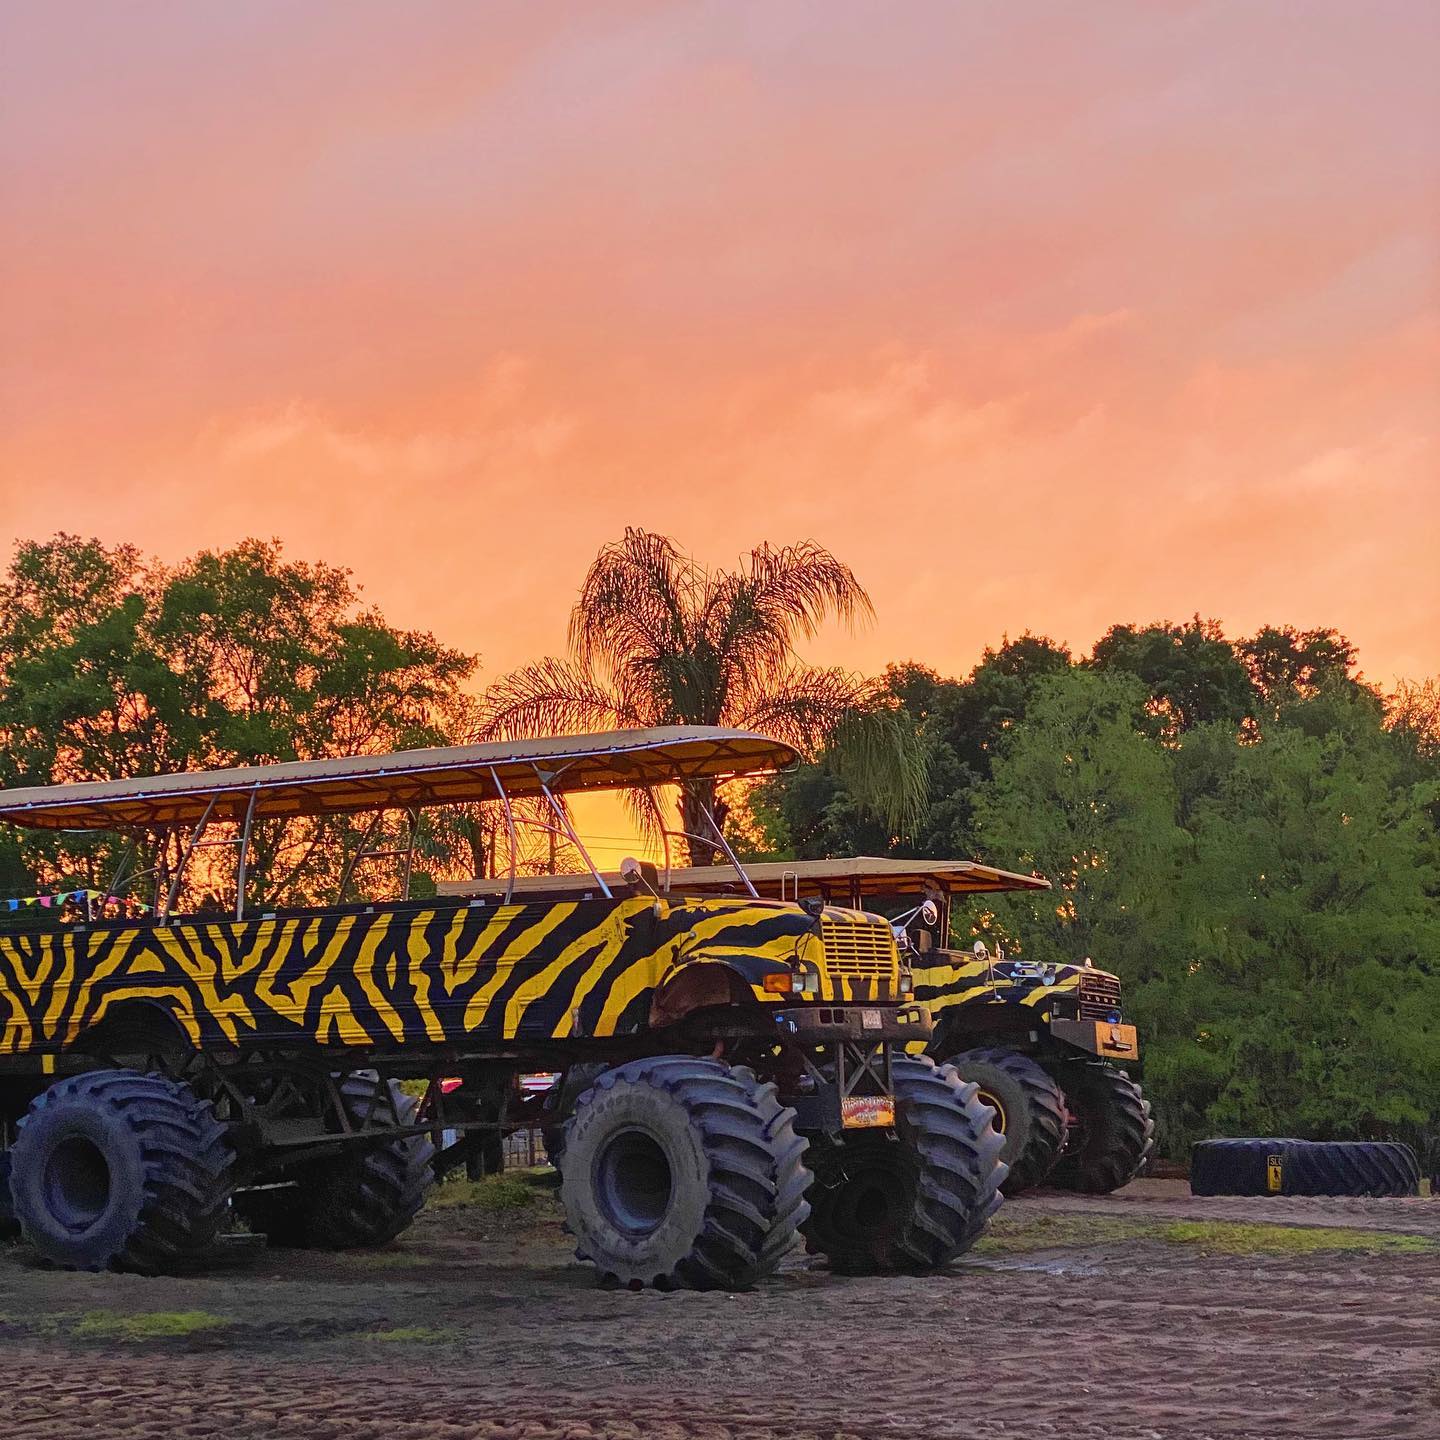 World's Largest Monster Truck Safari: world record in Clermont, Florida